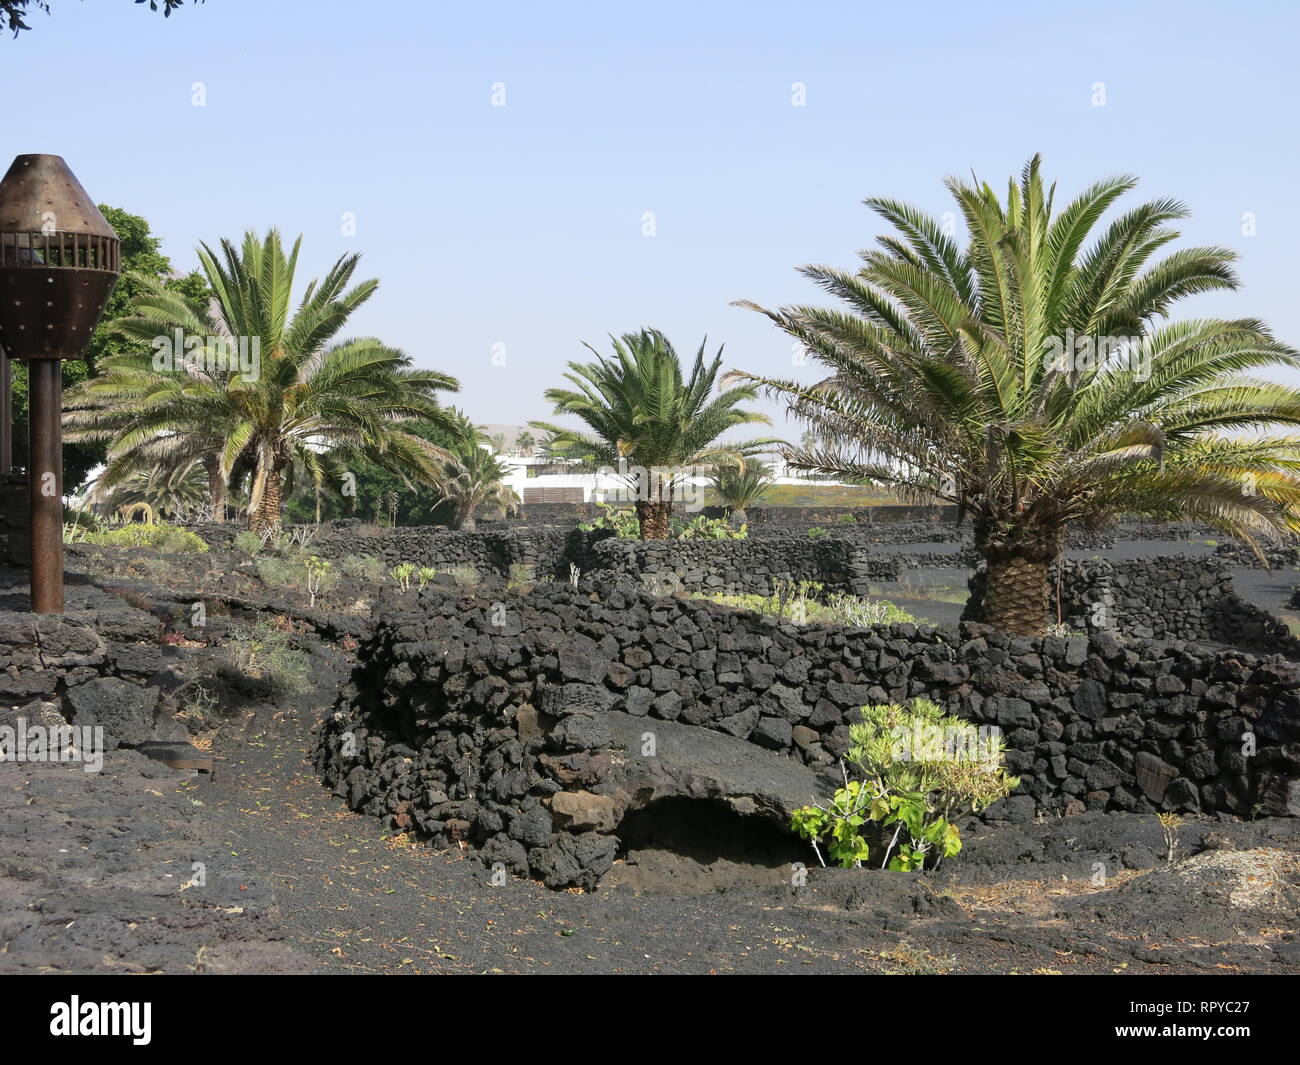 Typical view of Lanzarote with black rock walls made from lava, black fertile soil and palm trees Stock Photo